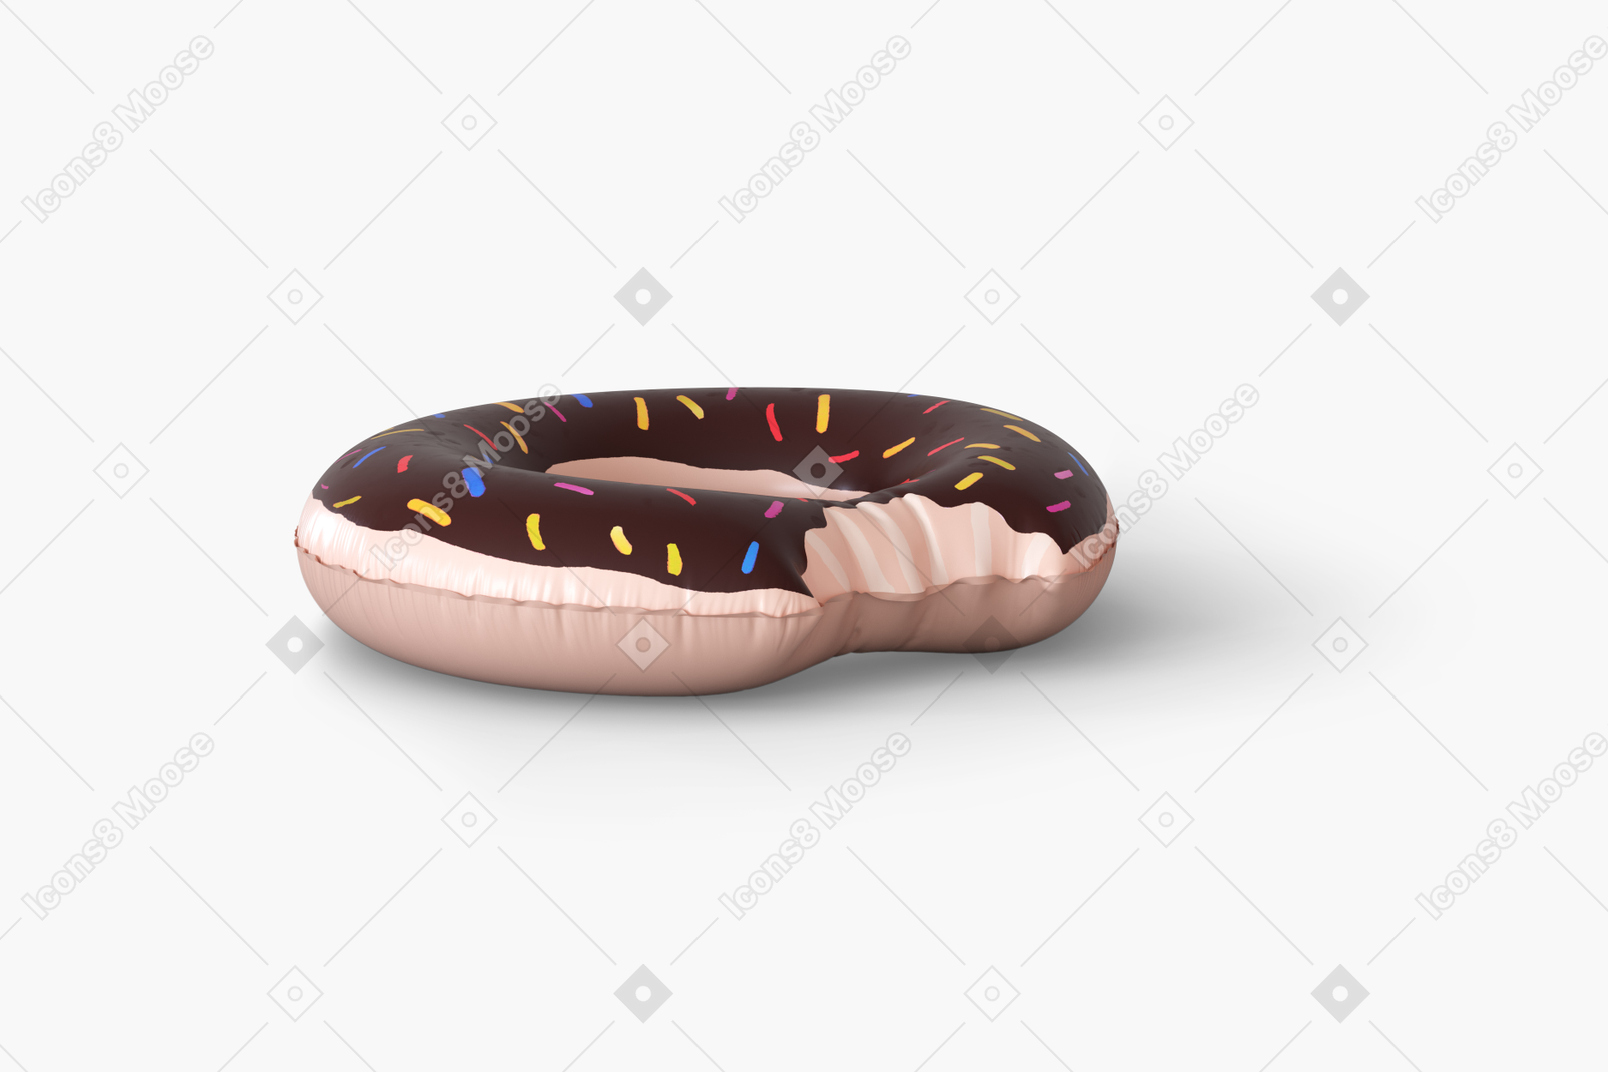 Shot of brown and white donut rubber ring